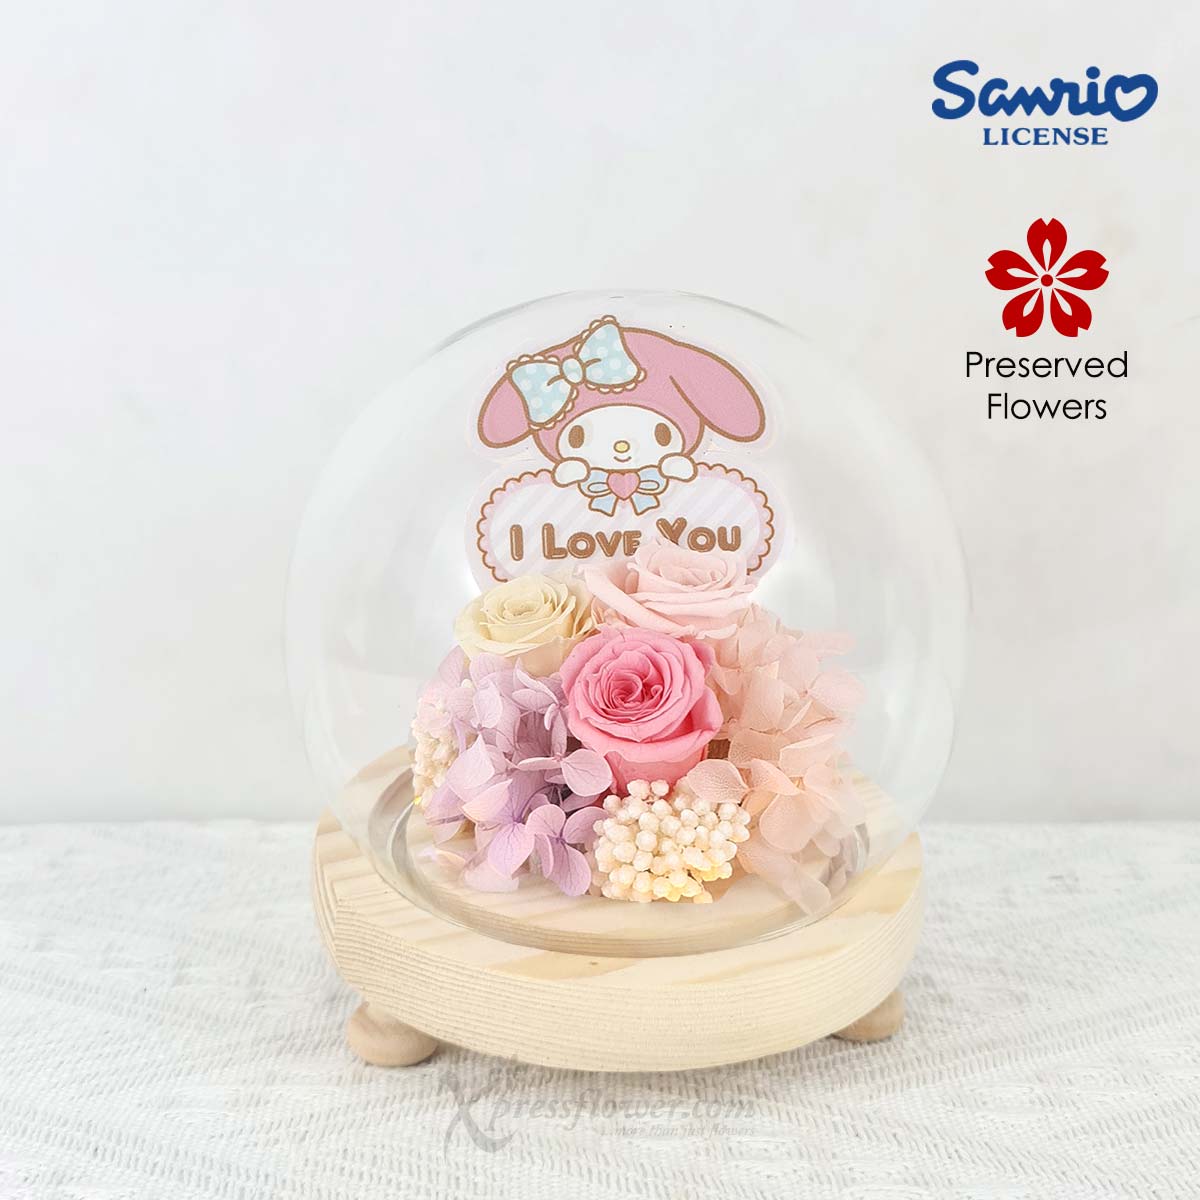 VDS2492 Melody Glow (Sanrio Preserved Flowers) 1C